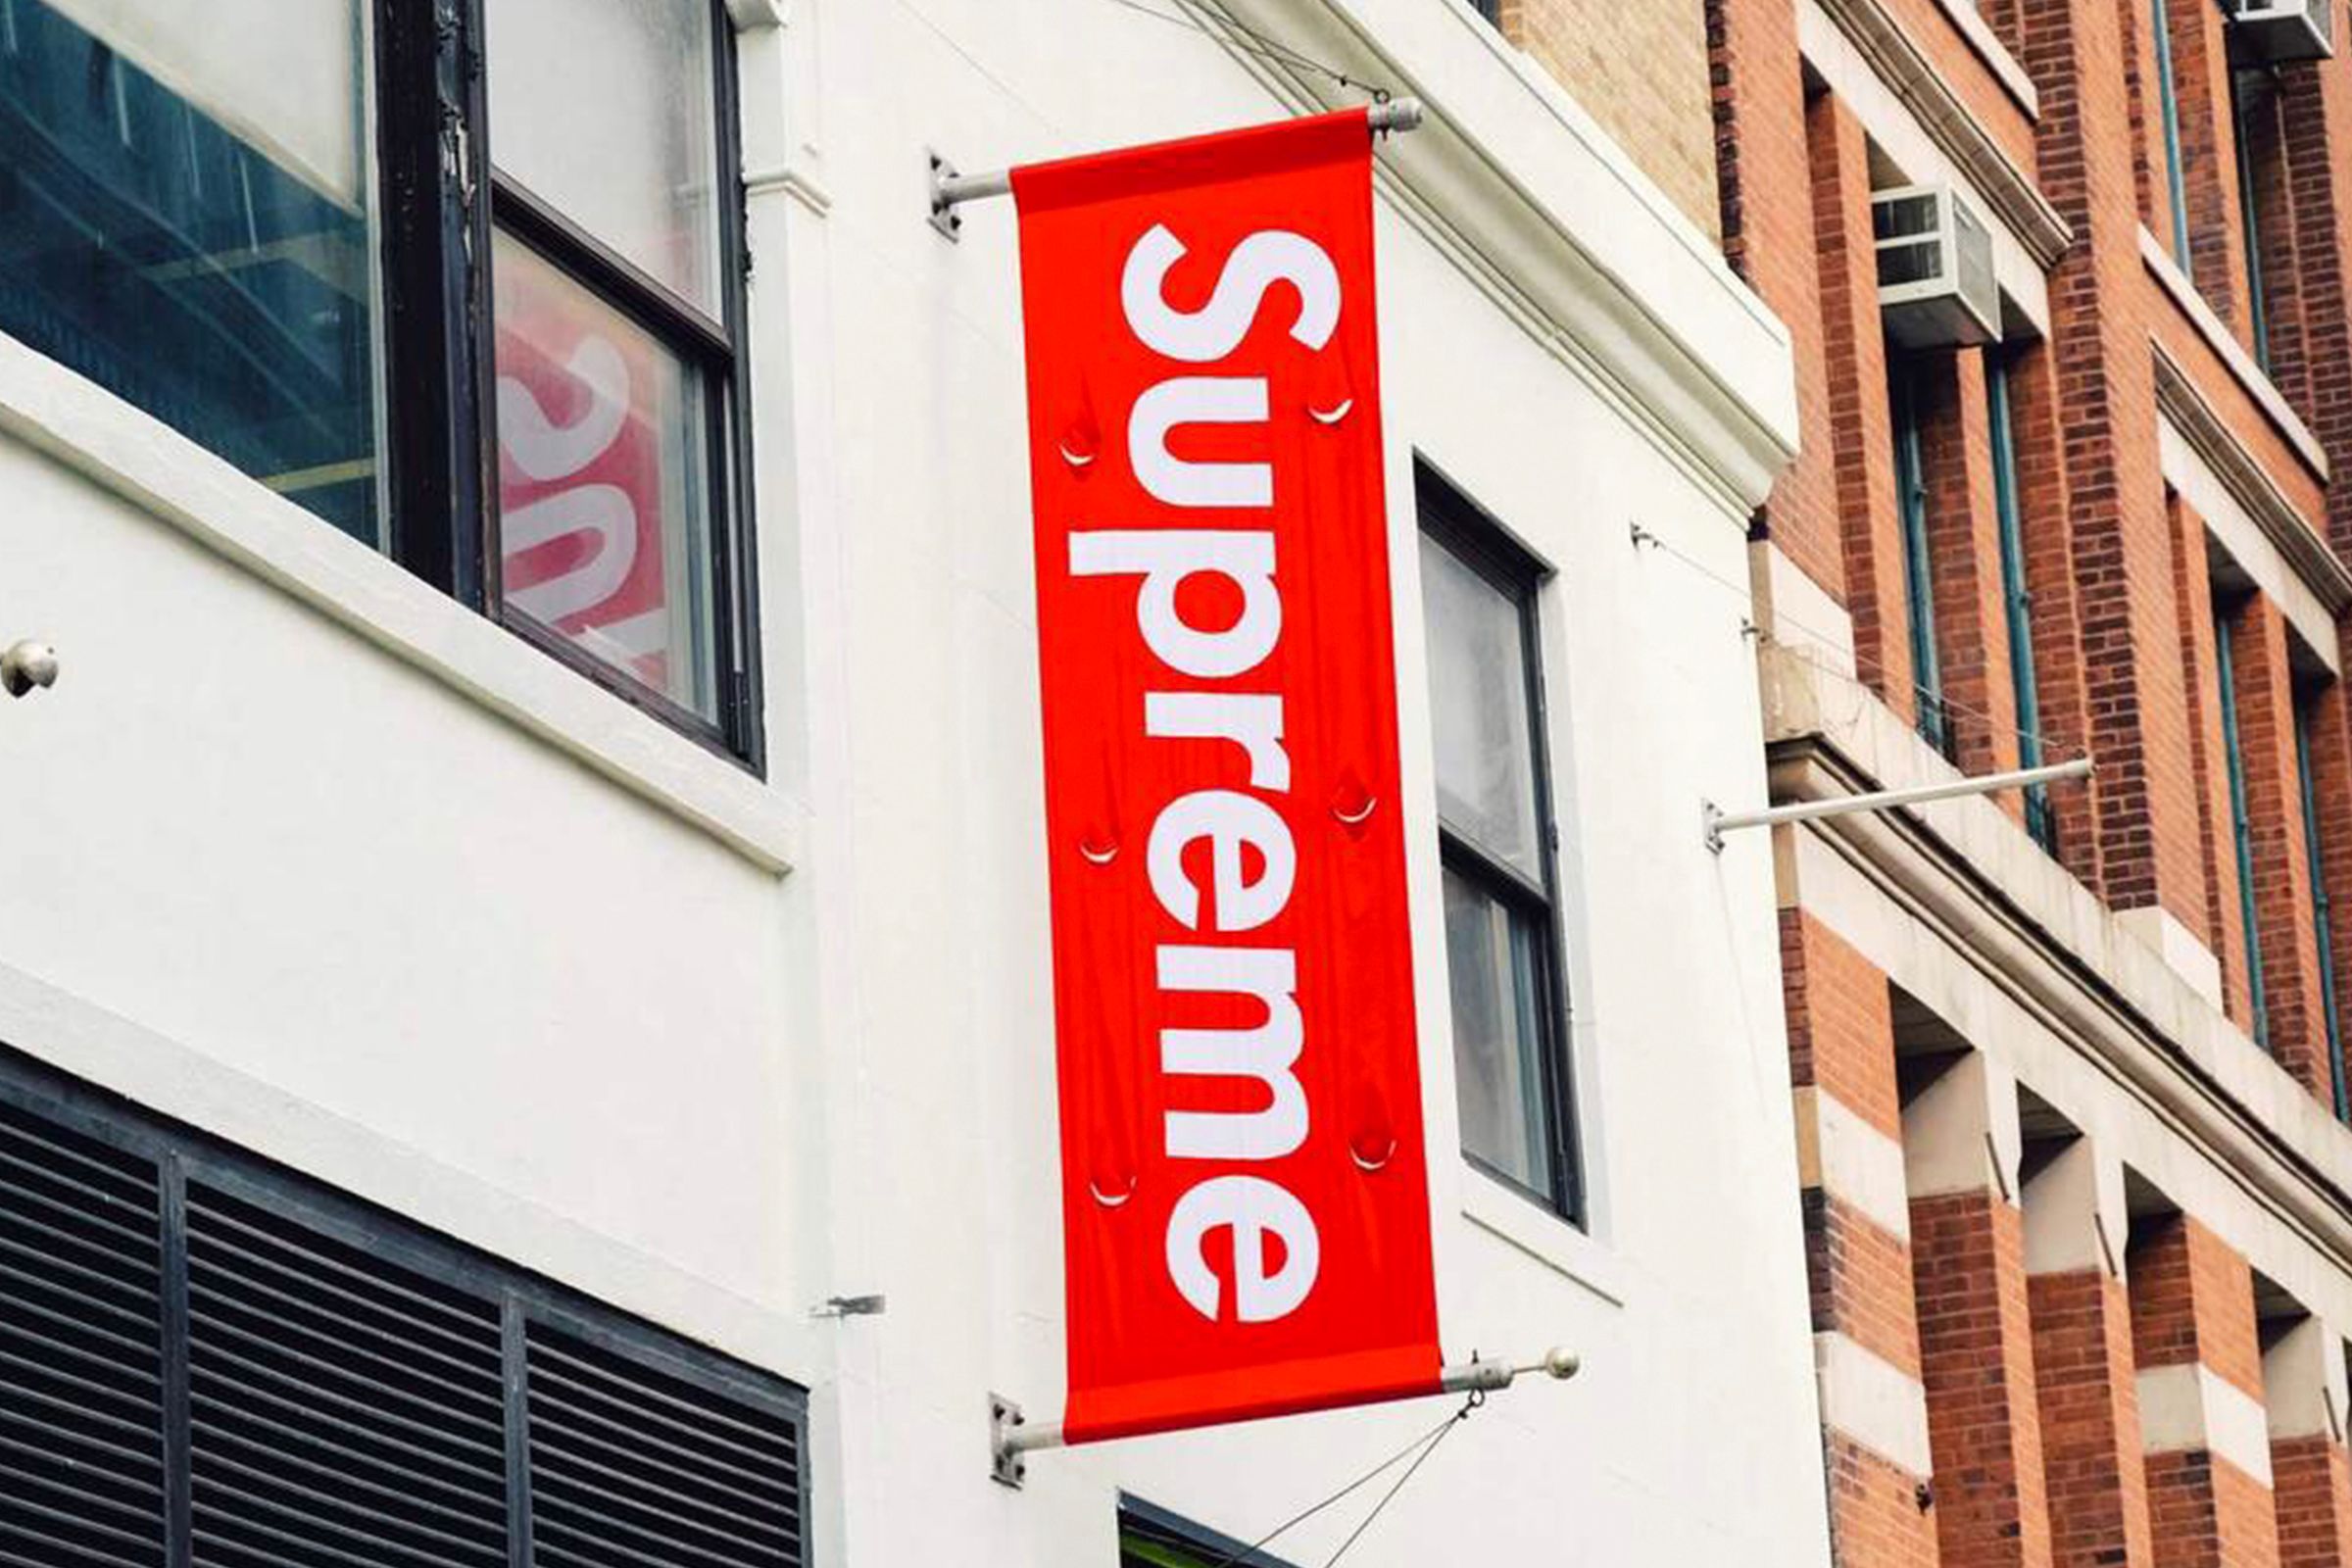 Louis Vuitton X Supreme pop-up shop opens today in downtown L.A.